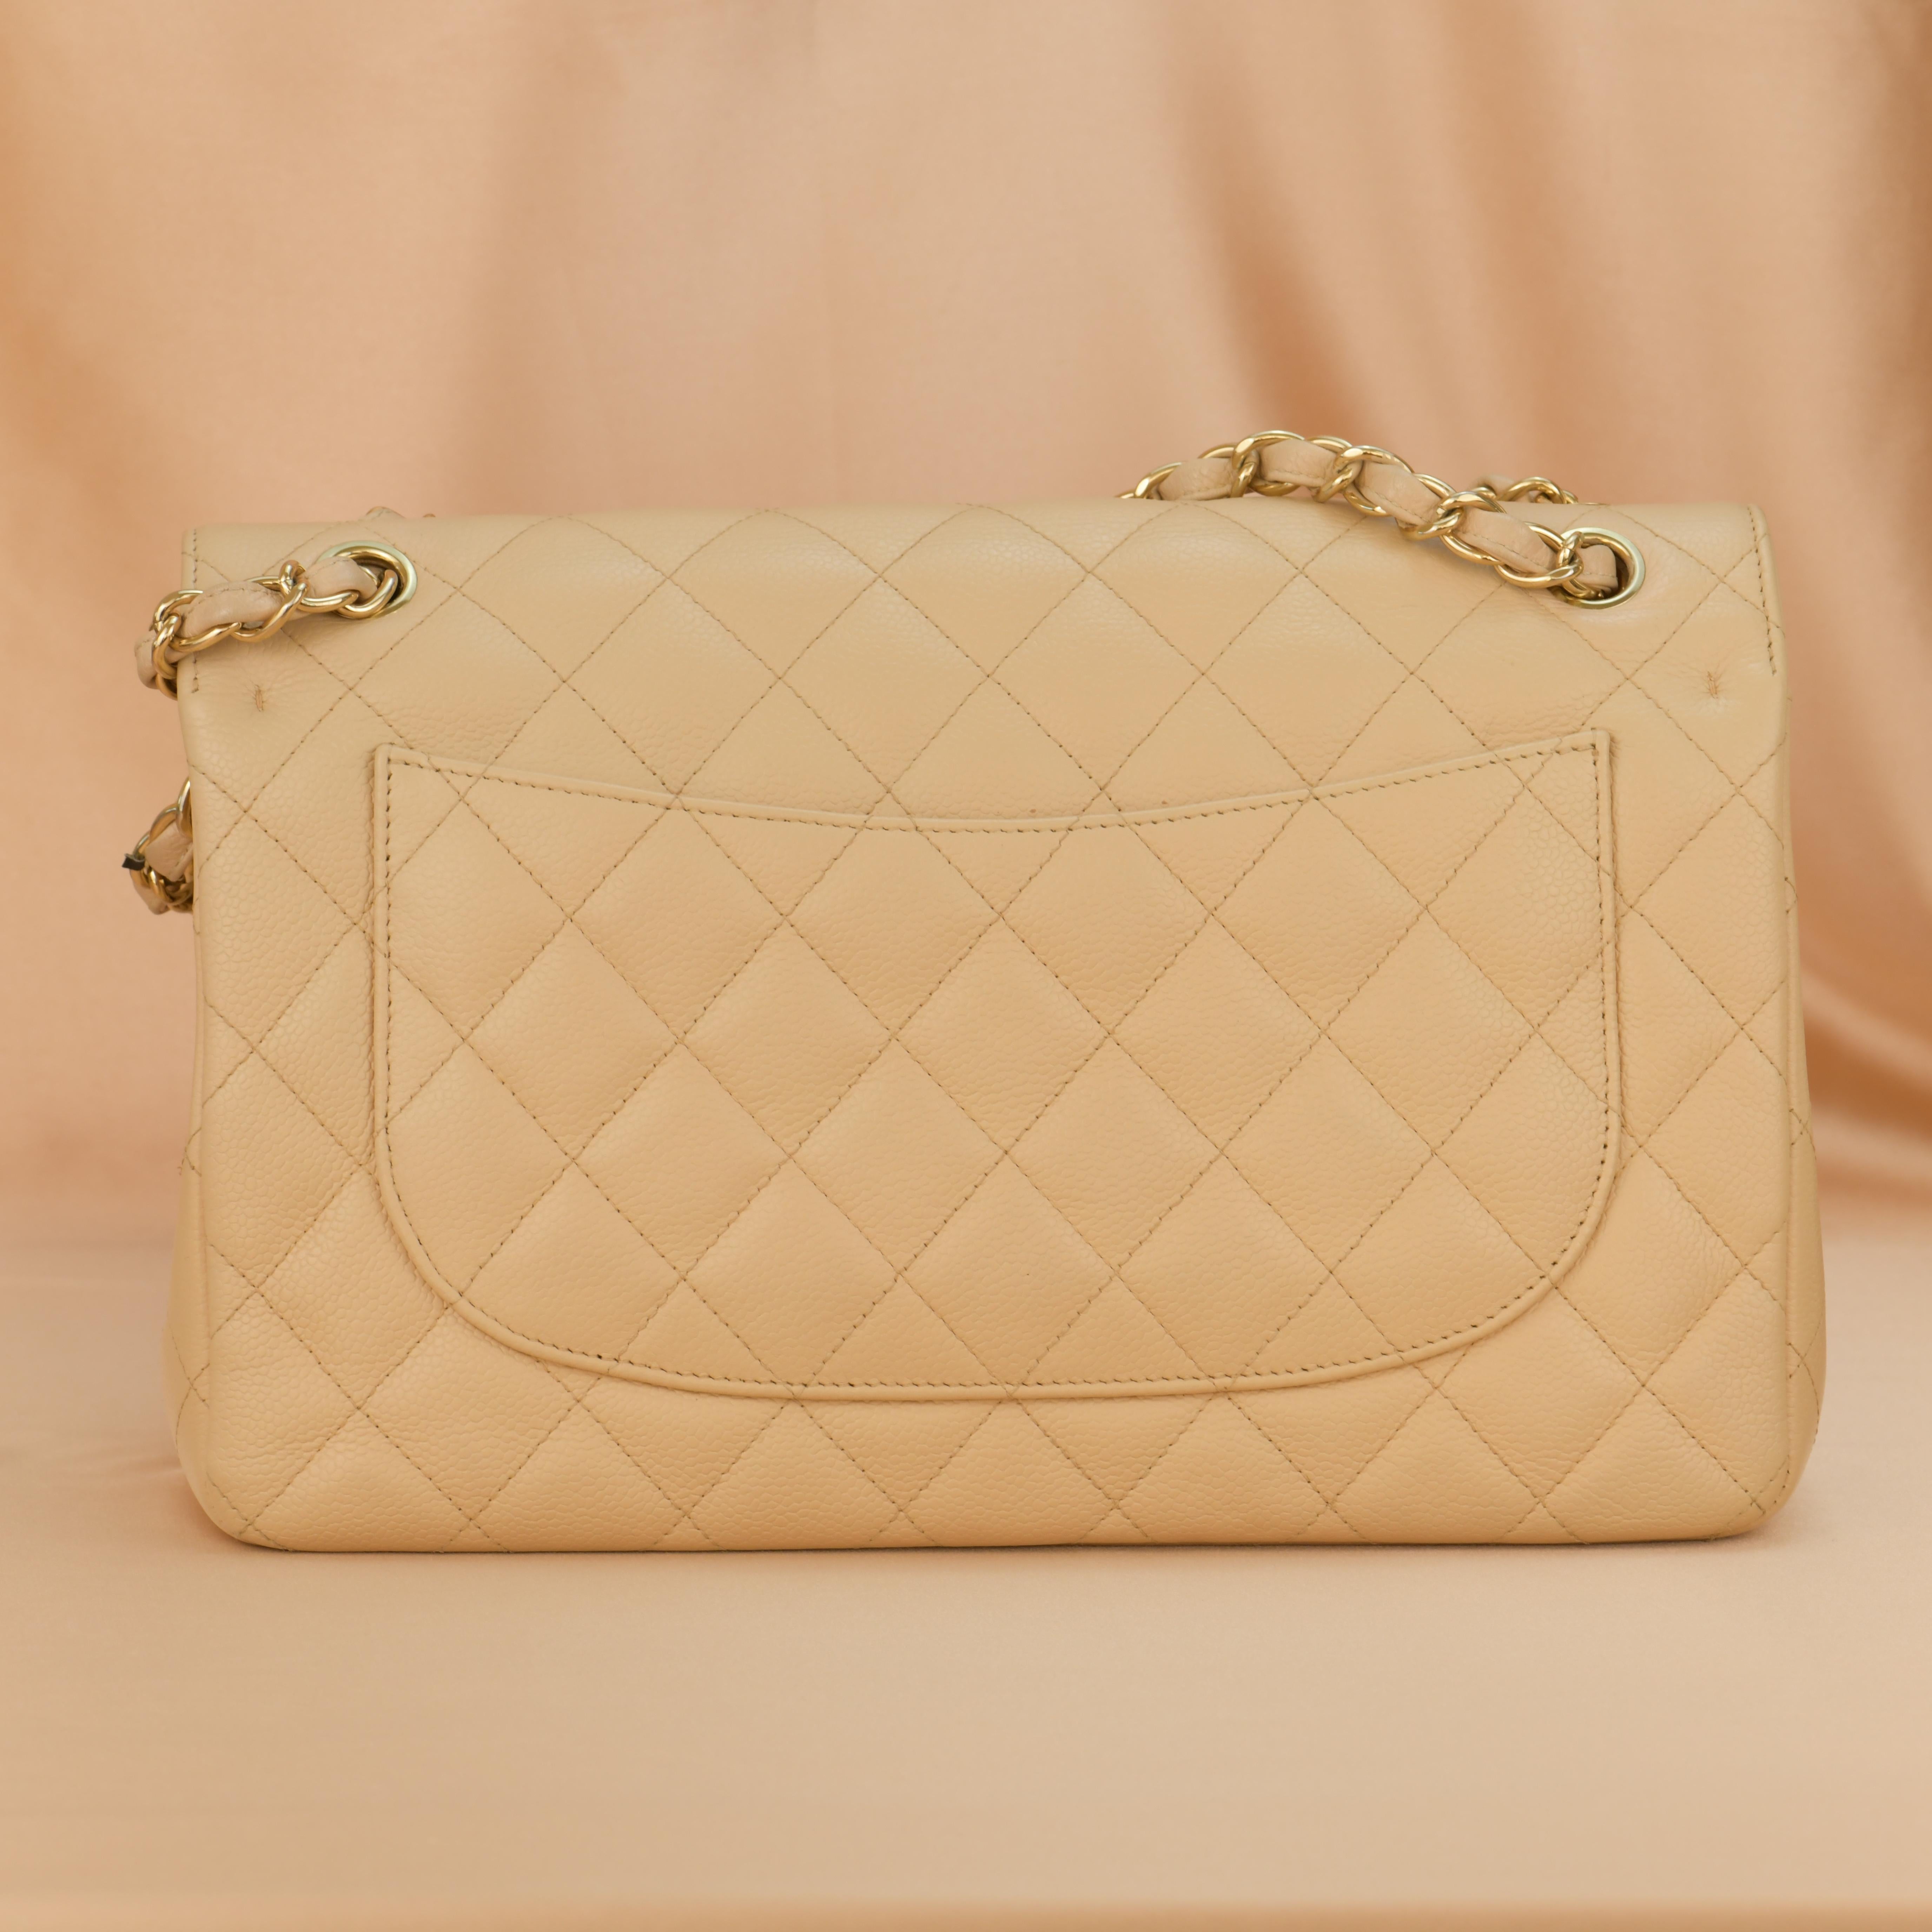 Chanel Beige Calfskin Leather Jumbo Classic Double Flap Bag For Sale 1